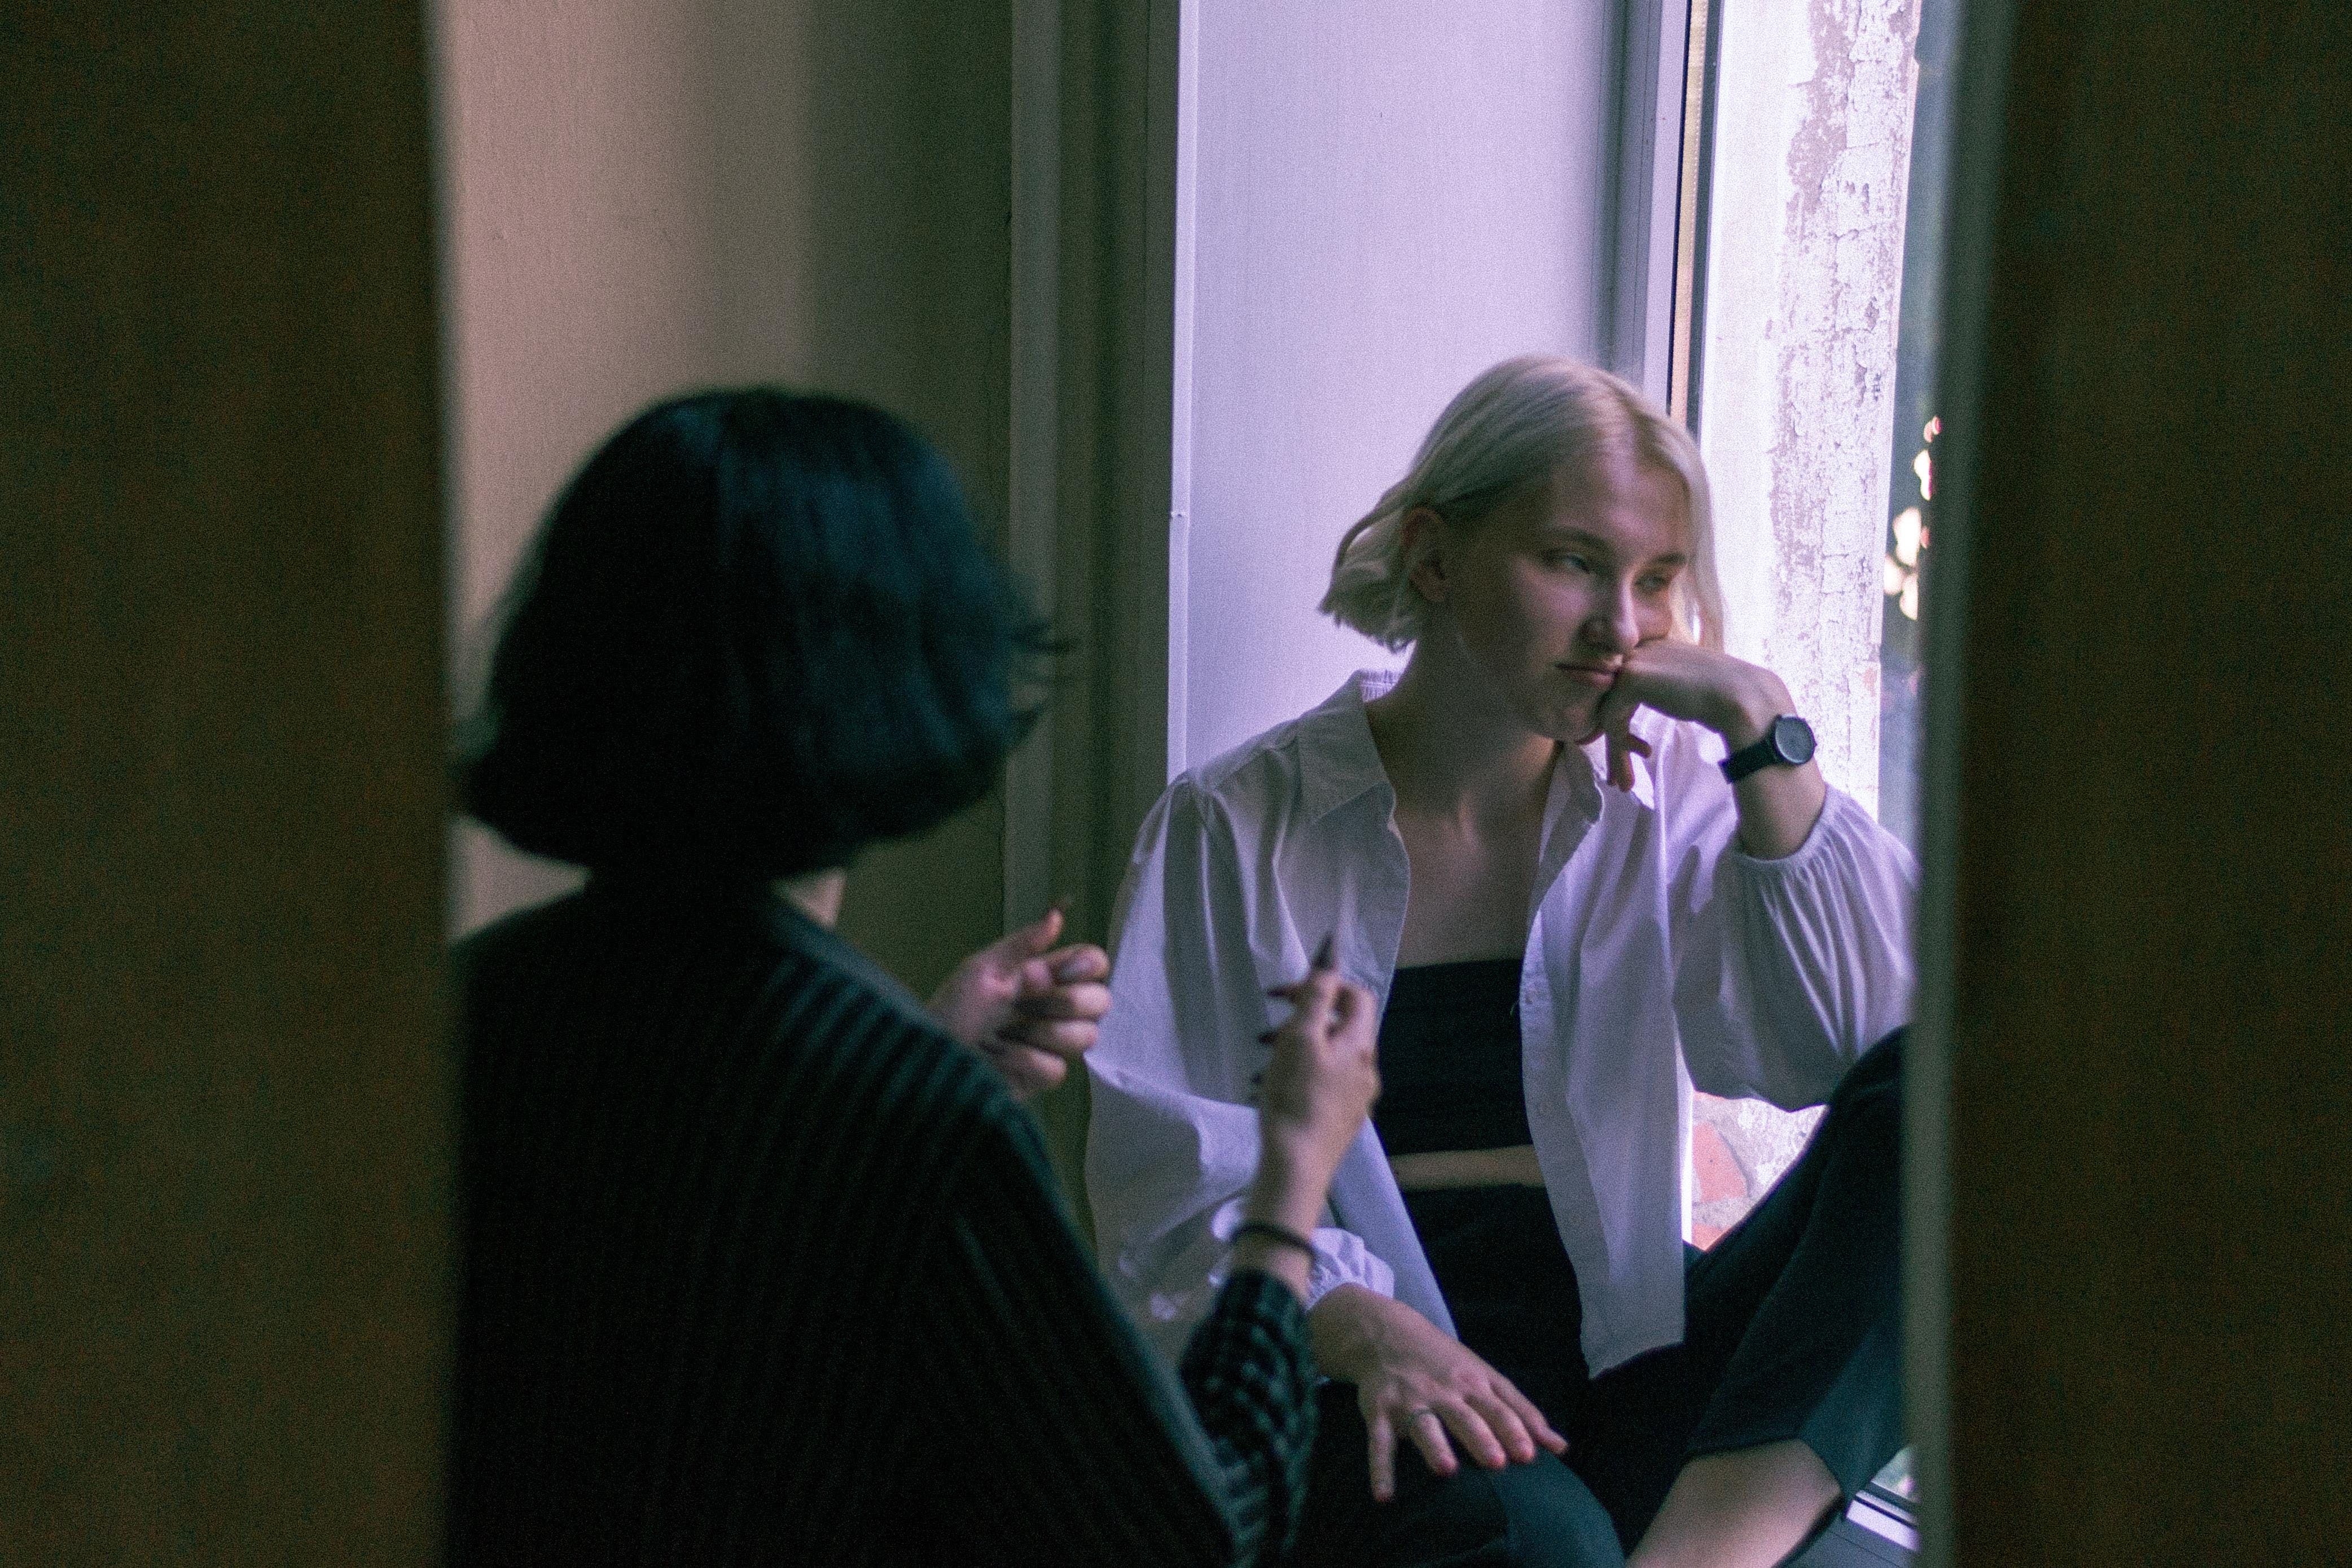 A photo capturing a conversation between two white women, taken through a doorway. The person in the foreground is seen from the back, with short dark hair, wearing a striped garment. Facing them is a person with short blonde hair, dressed in a white shirt, resting their chin on their hand with a pensive expression